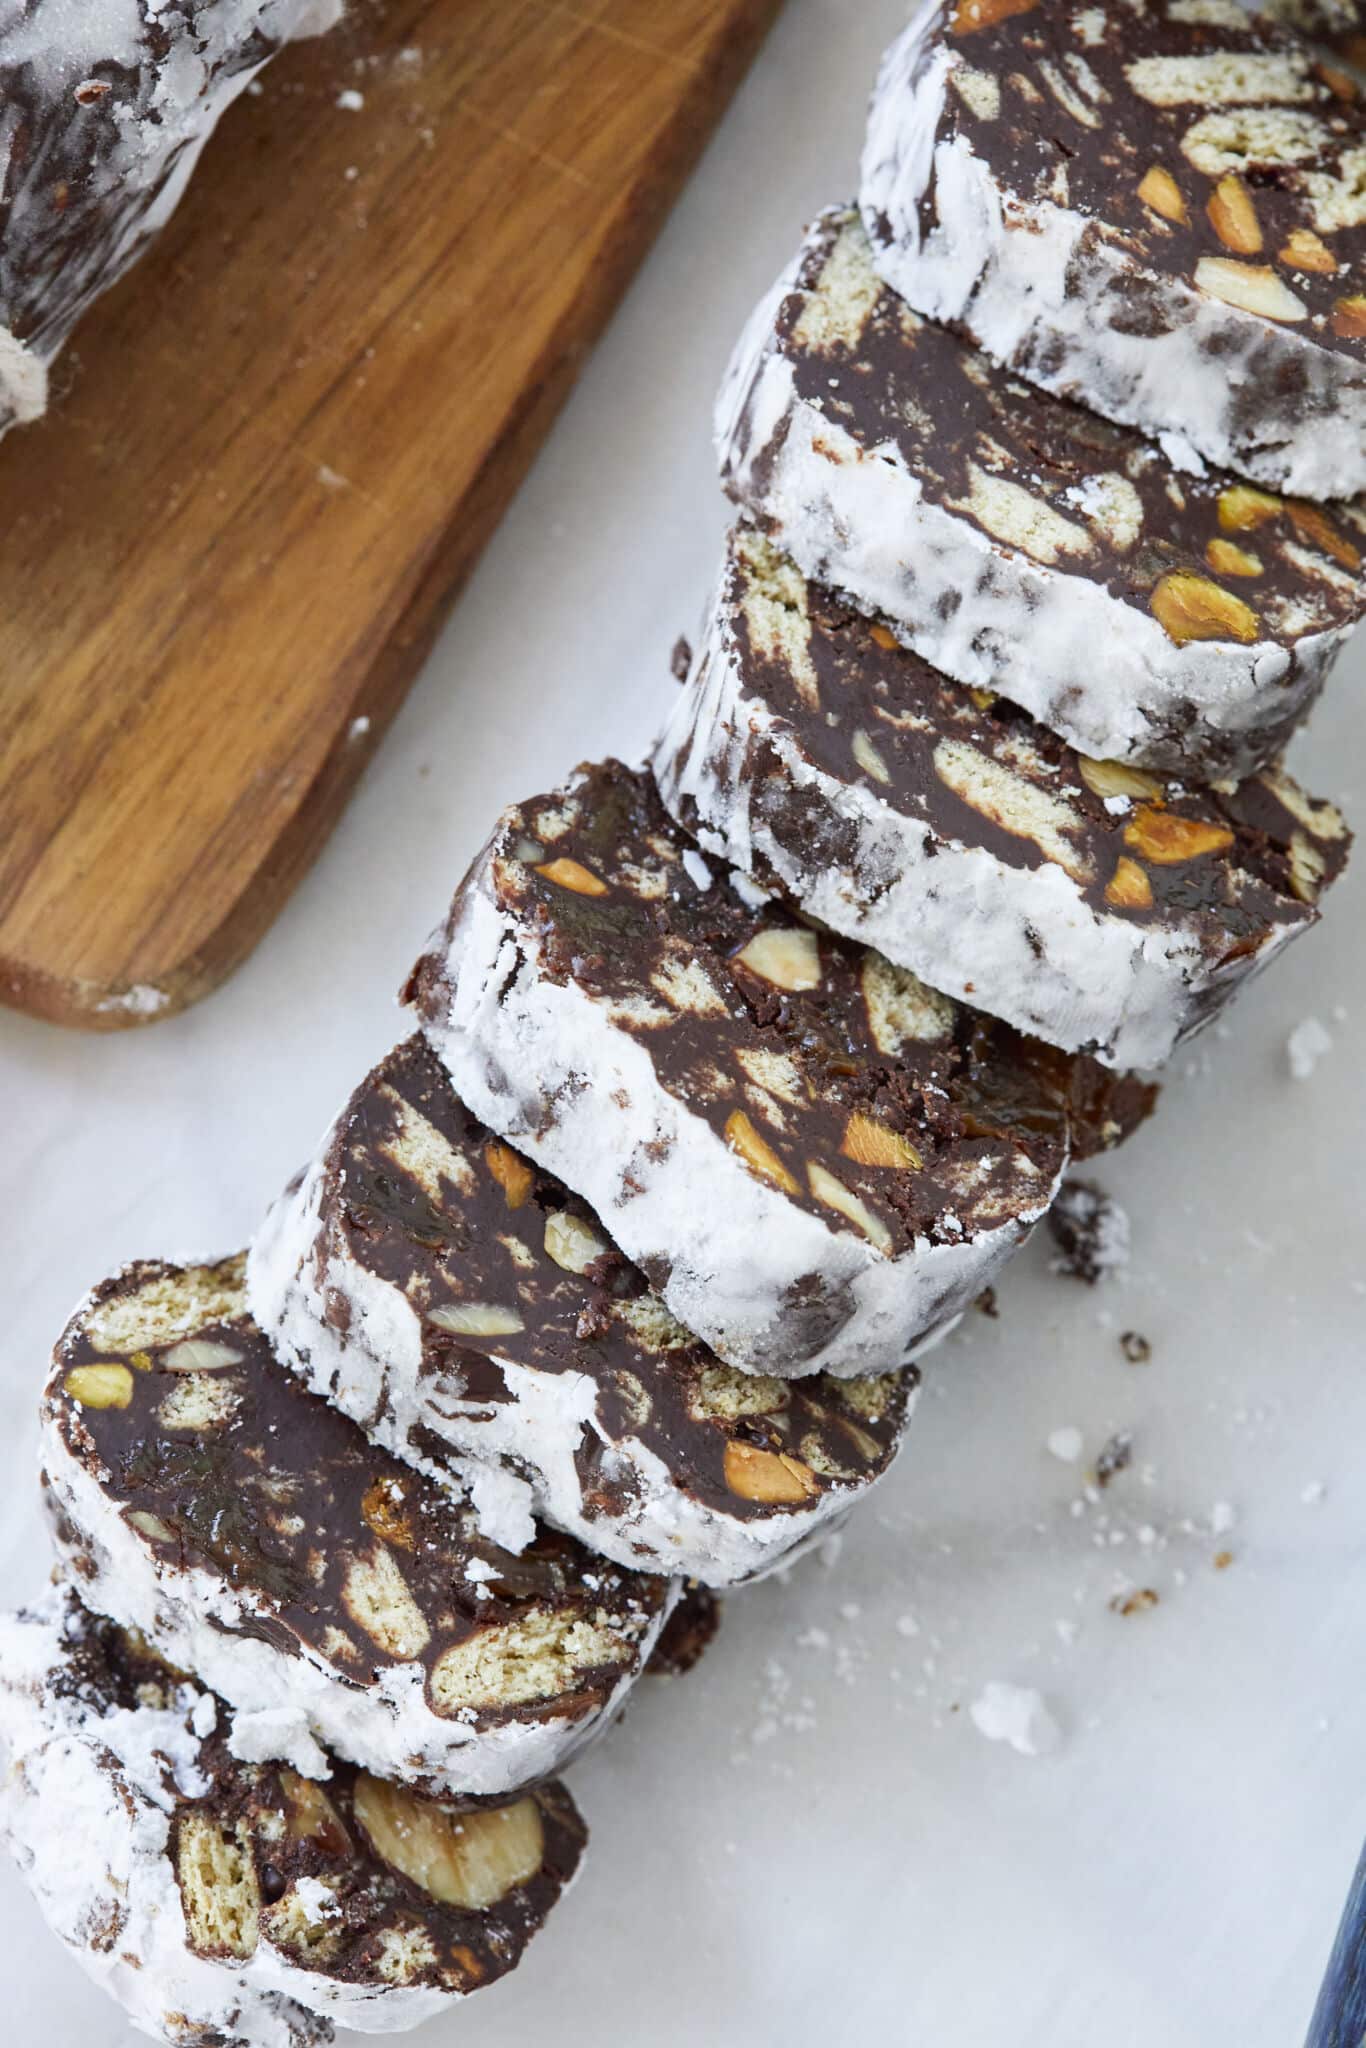 A close shot at the chocolate biscuit cake shows the charming marbled interior when sliced.  This mixture is shaped into a log, resembling a salami, and is often rolled in powdered sugar or cocoa powder to simulate the look of cured meat.